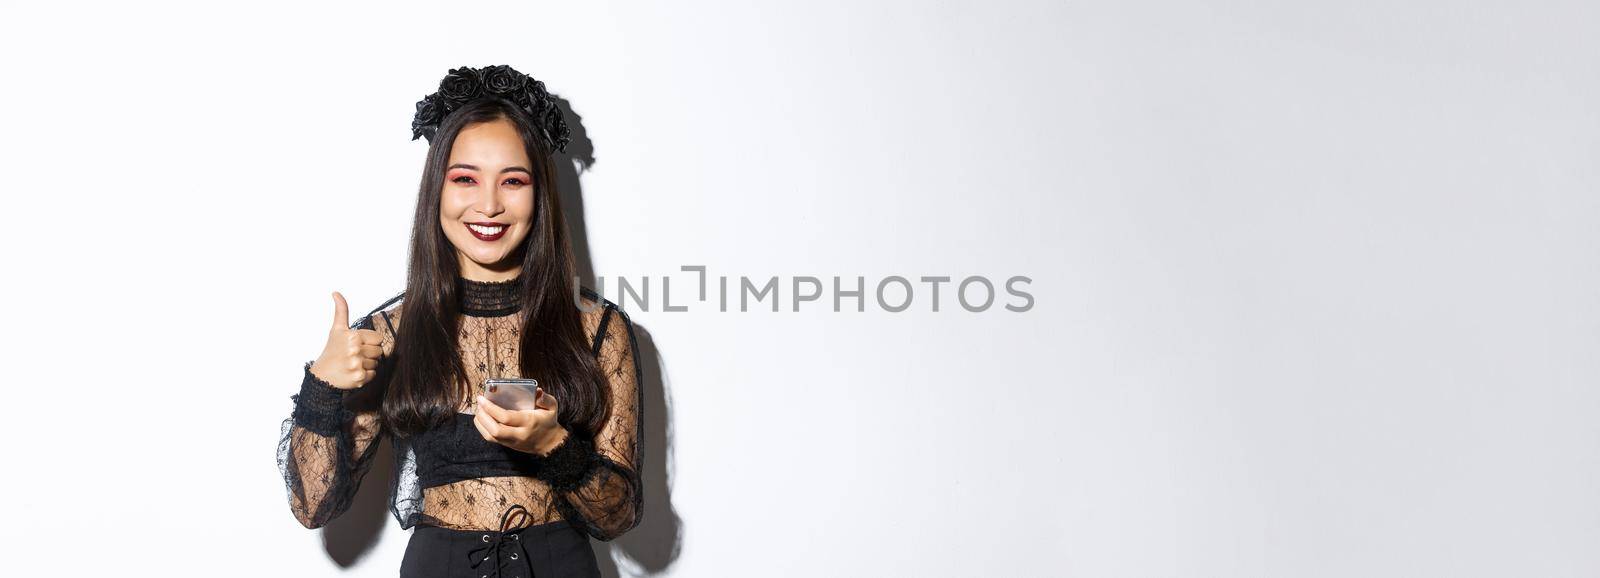 Image of satisfied smiling asian woman in halloween costume, showing thumbs-up in approval, wearing gothic lace dress for party.